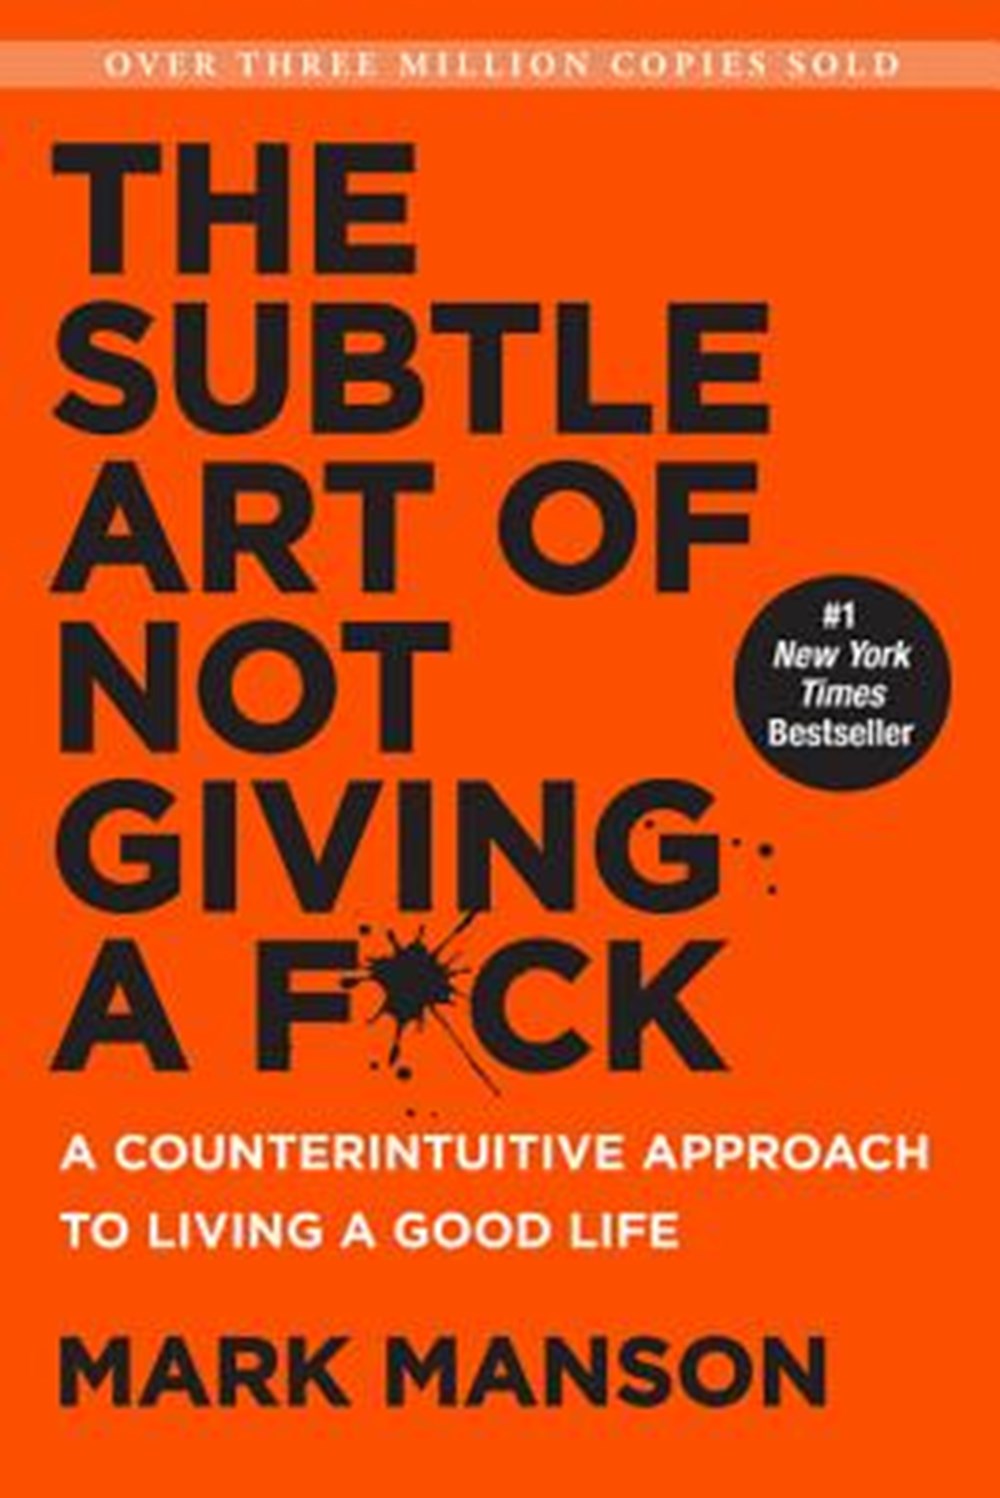 Subtle Art of Not Giving a F*ck A Counterintuitive Approach to Living a Good Life